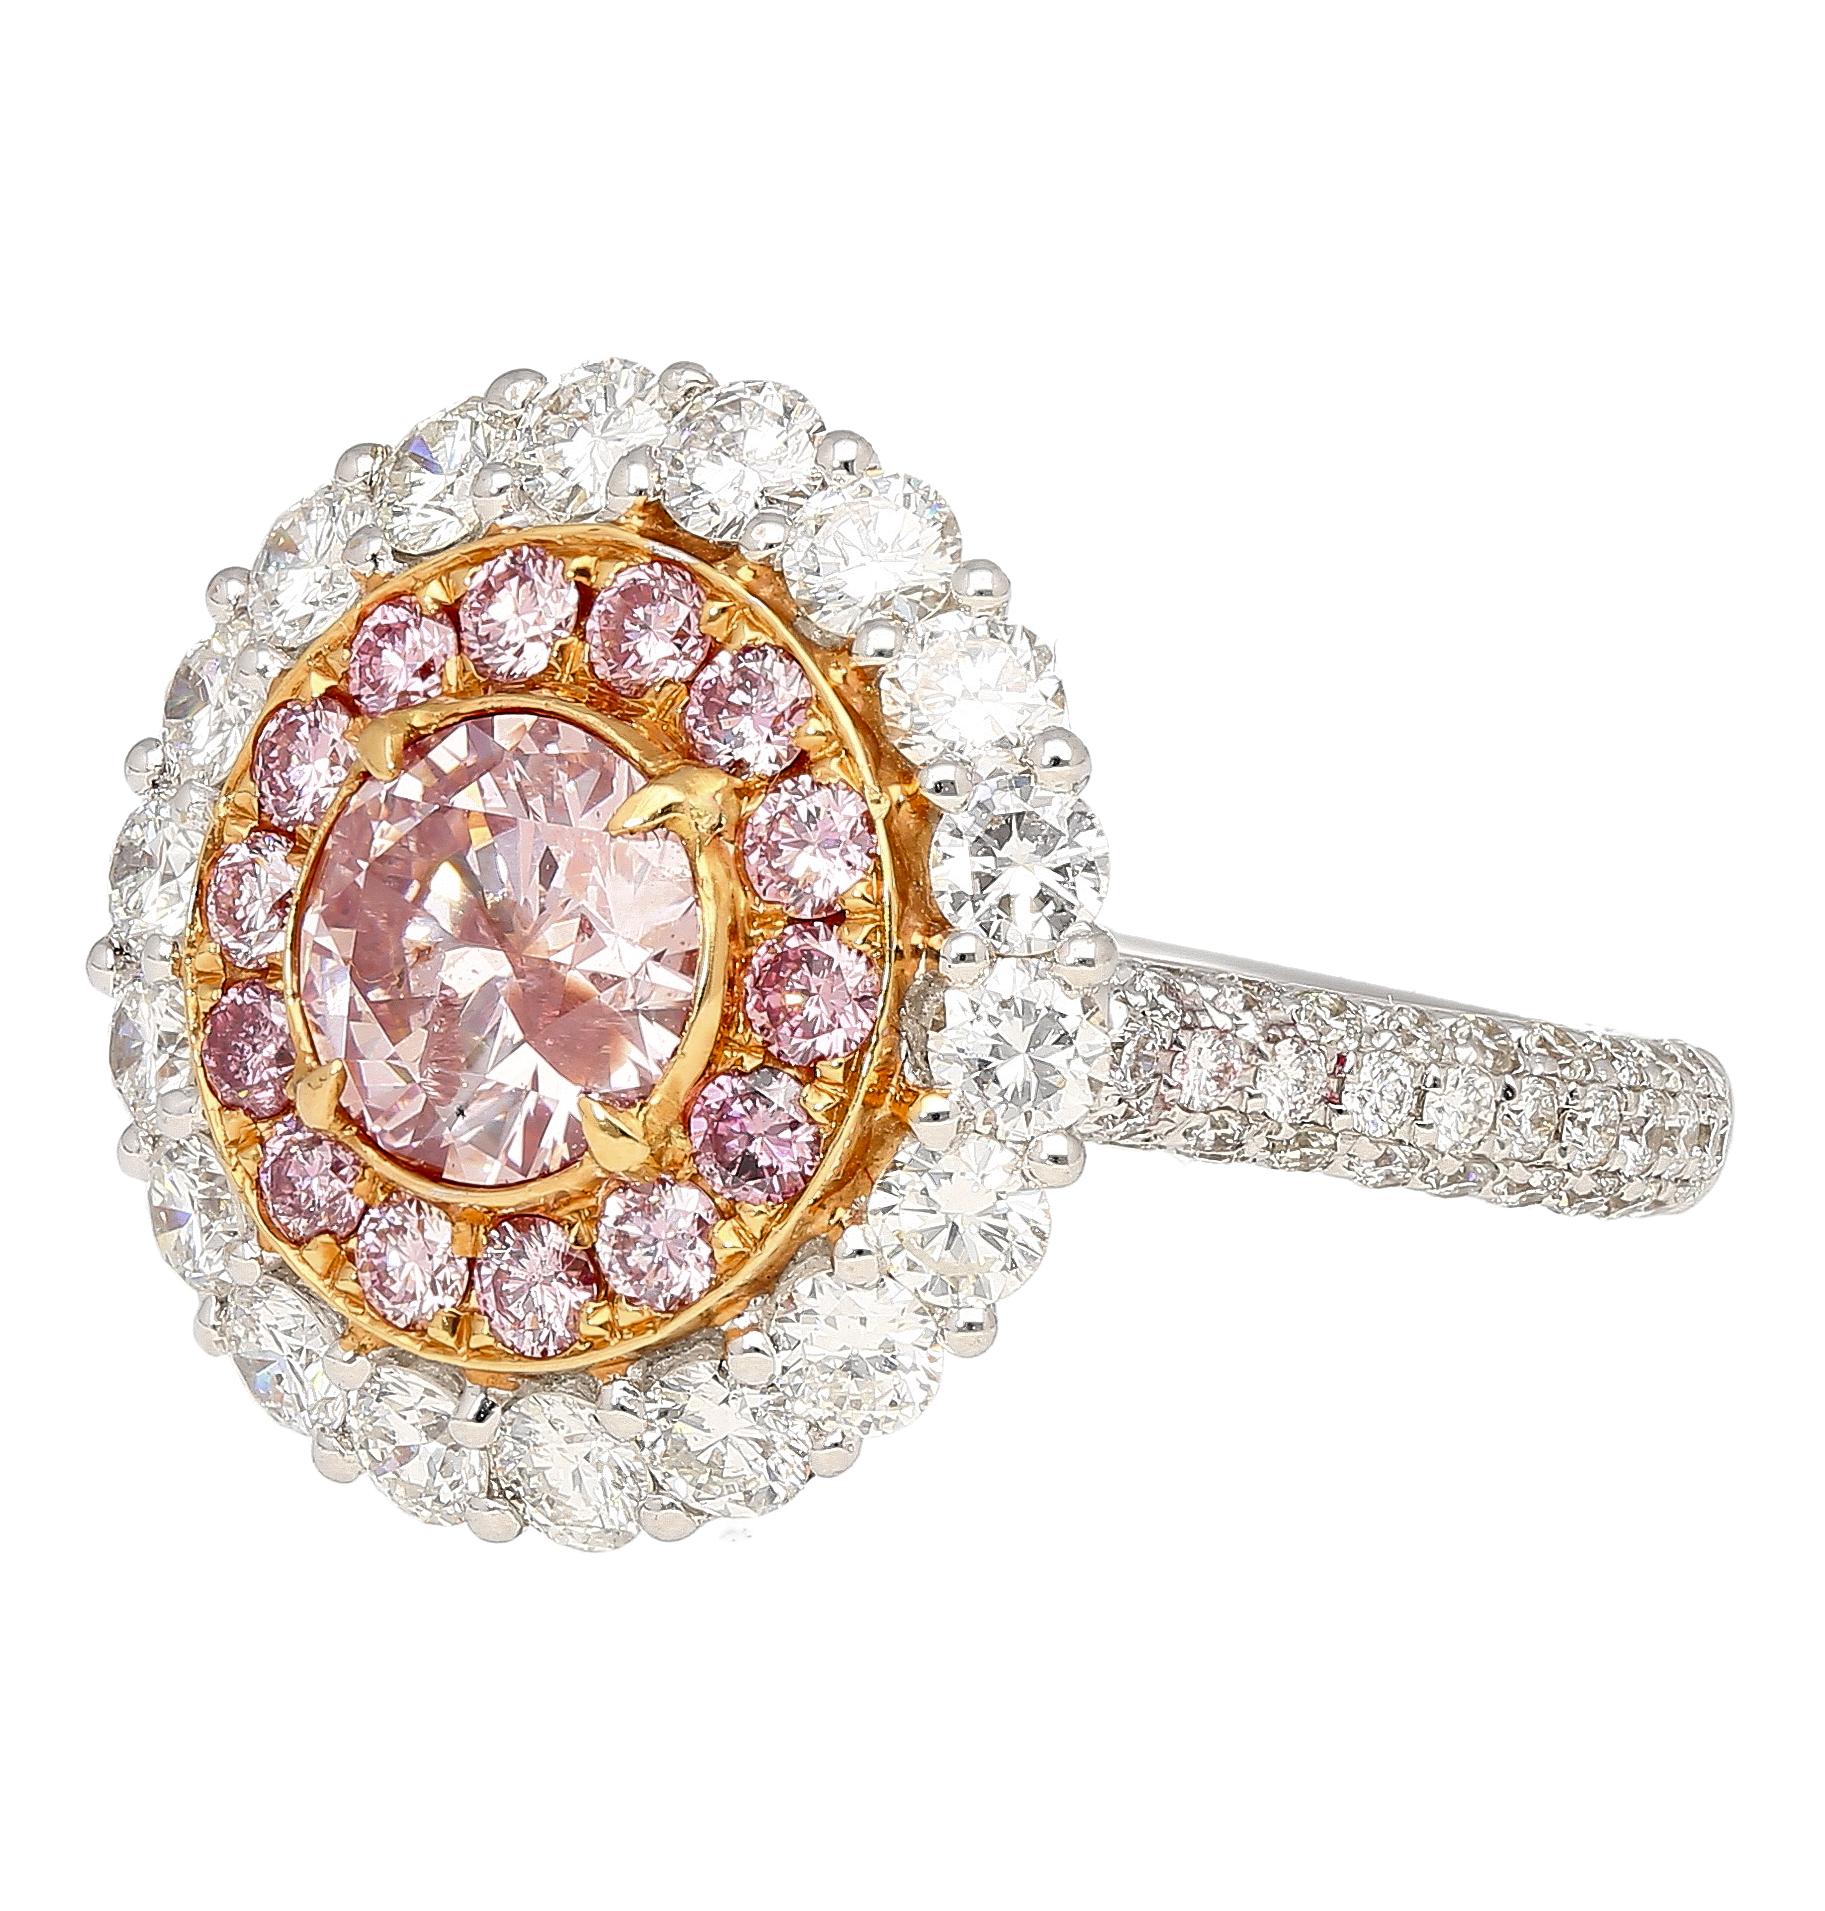 GIA certified round cut fancy pink diamond with multi colored double diamond halo ring crafted in 18k white & rose gold. The main pink gemstone and the 14 round cut pink diamonds are prong set in 18k rose gold. Surrounding the pink diamonds are 96